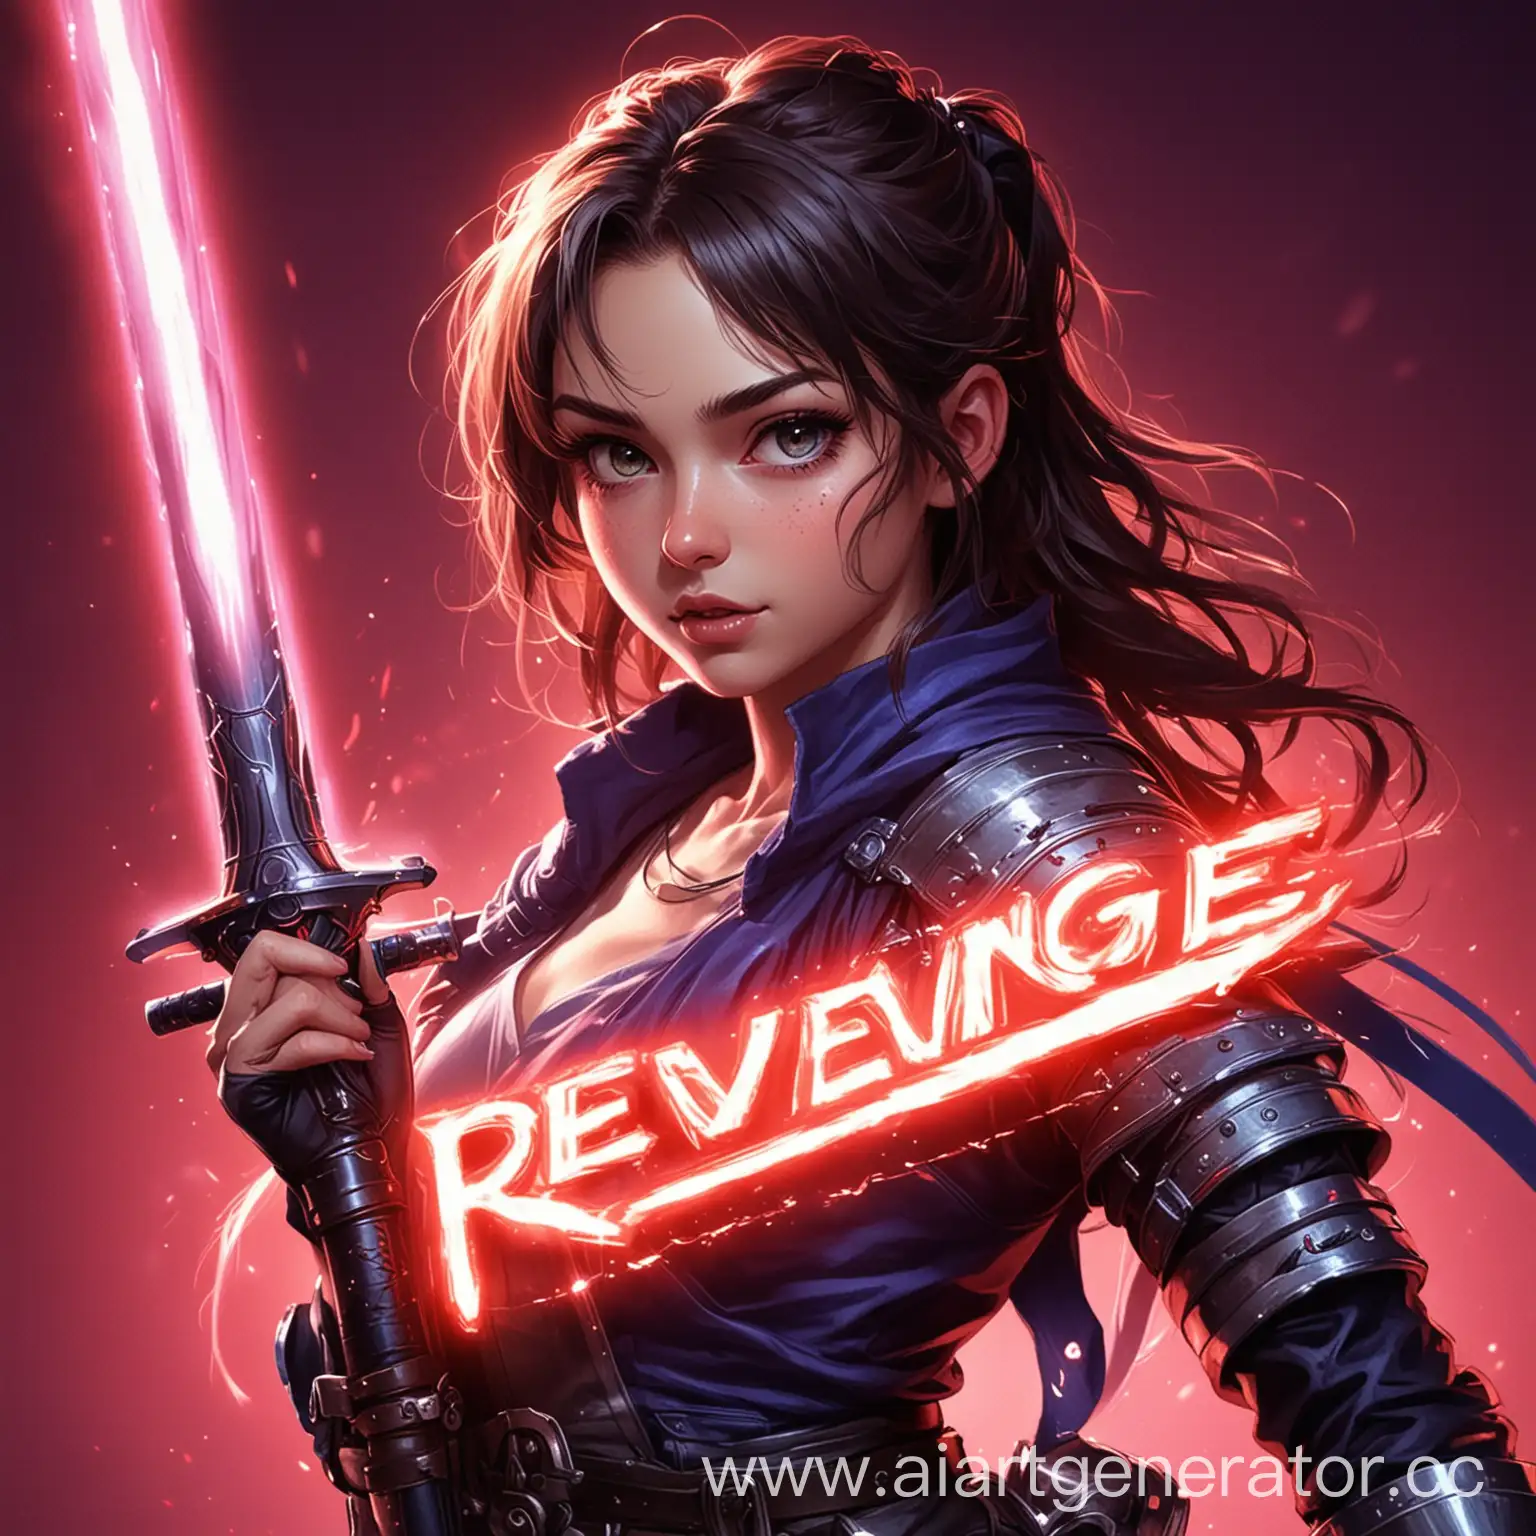 PhonkThemed-Girl-with-Glowing-Eyes-Holding-a-Saber-Against-Neon-Light-Background